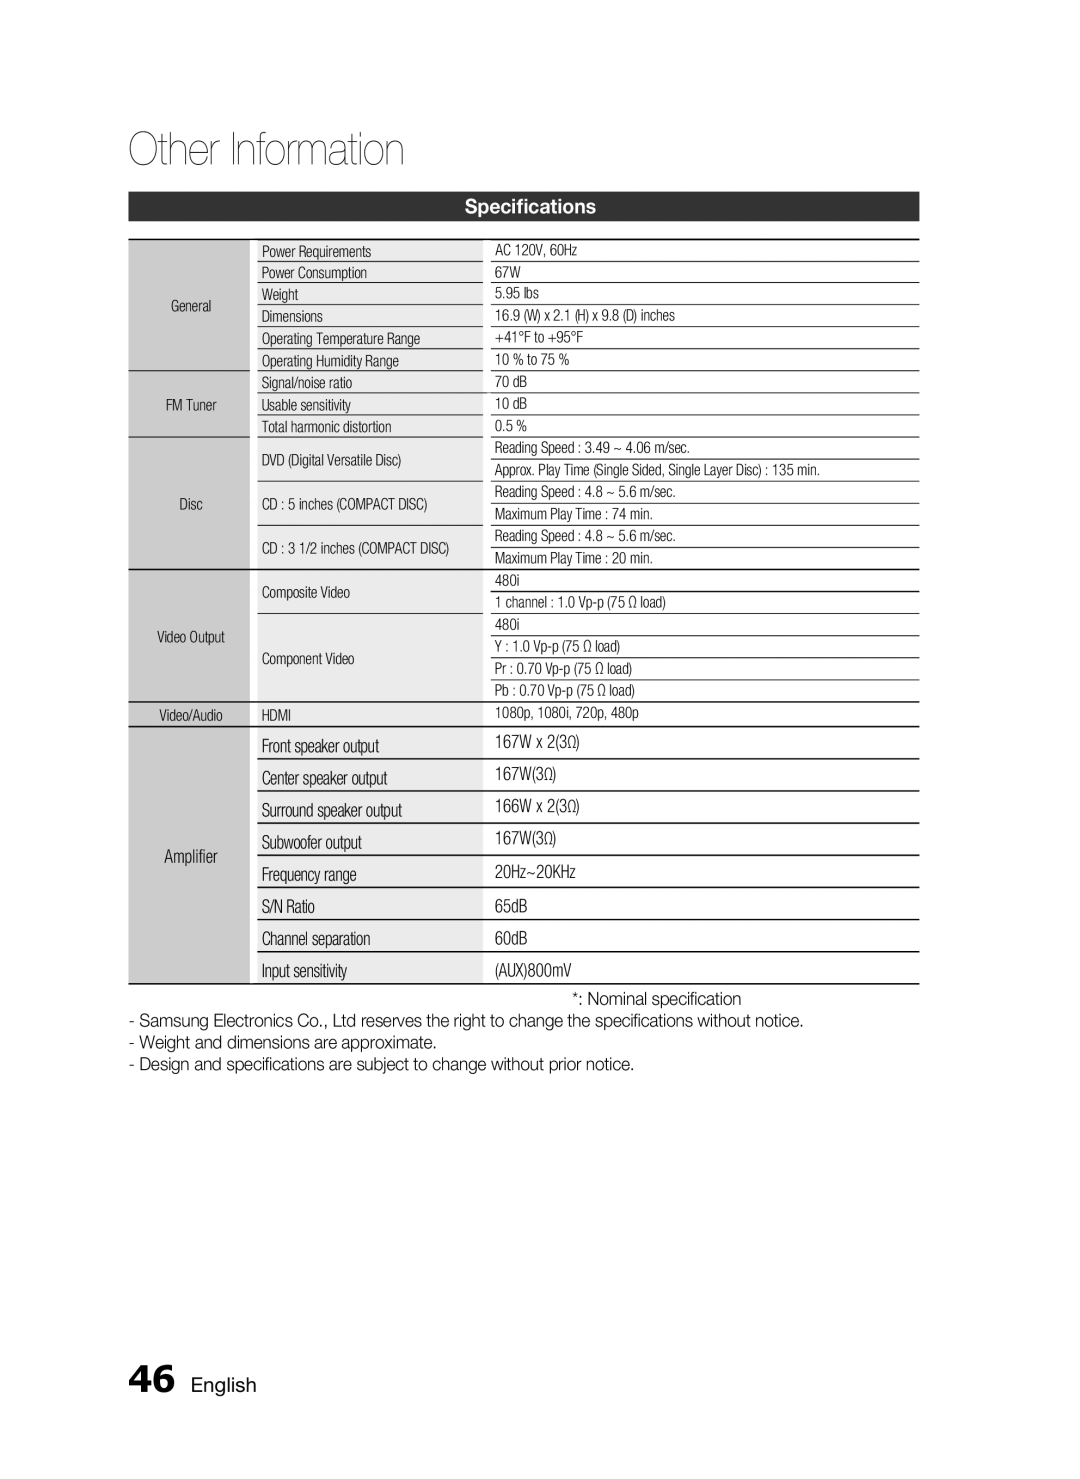 Samsung HT-D555, HT-D553, HT-D550 user manual Specifications, English, Other Information 